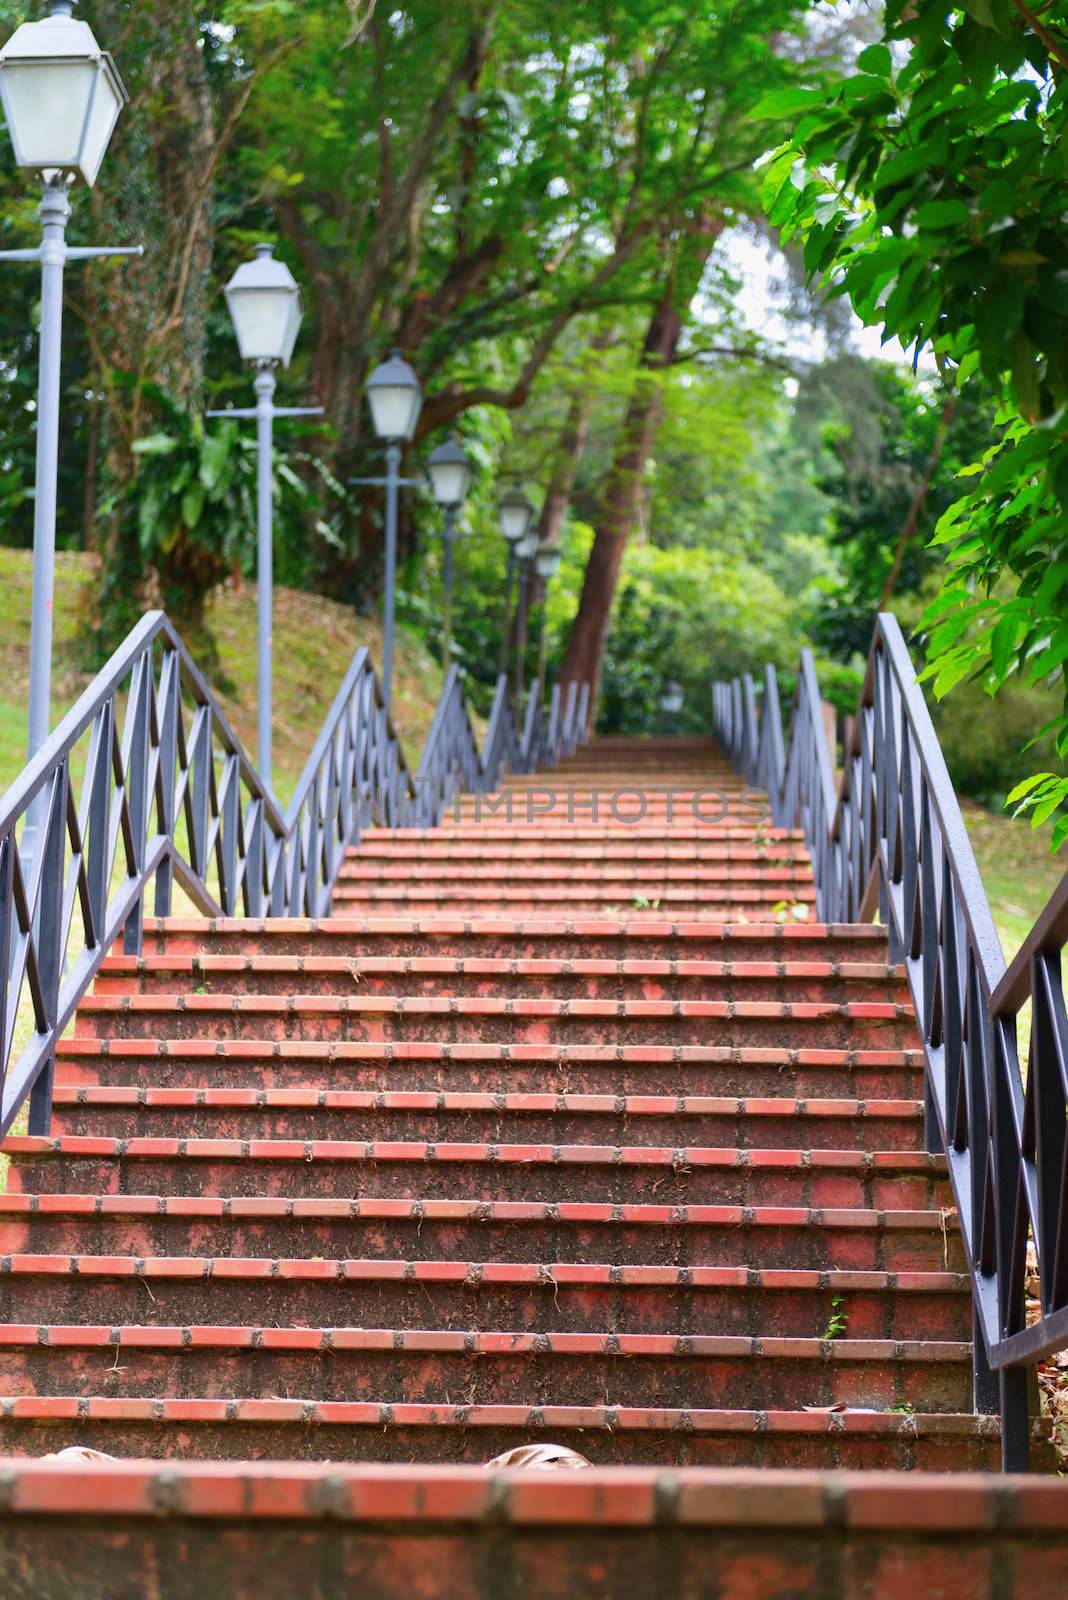 Red stone stairs on in a park with handrail and street lamp